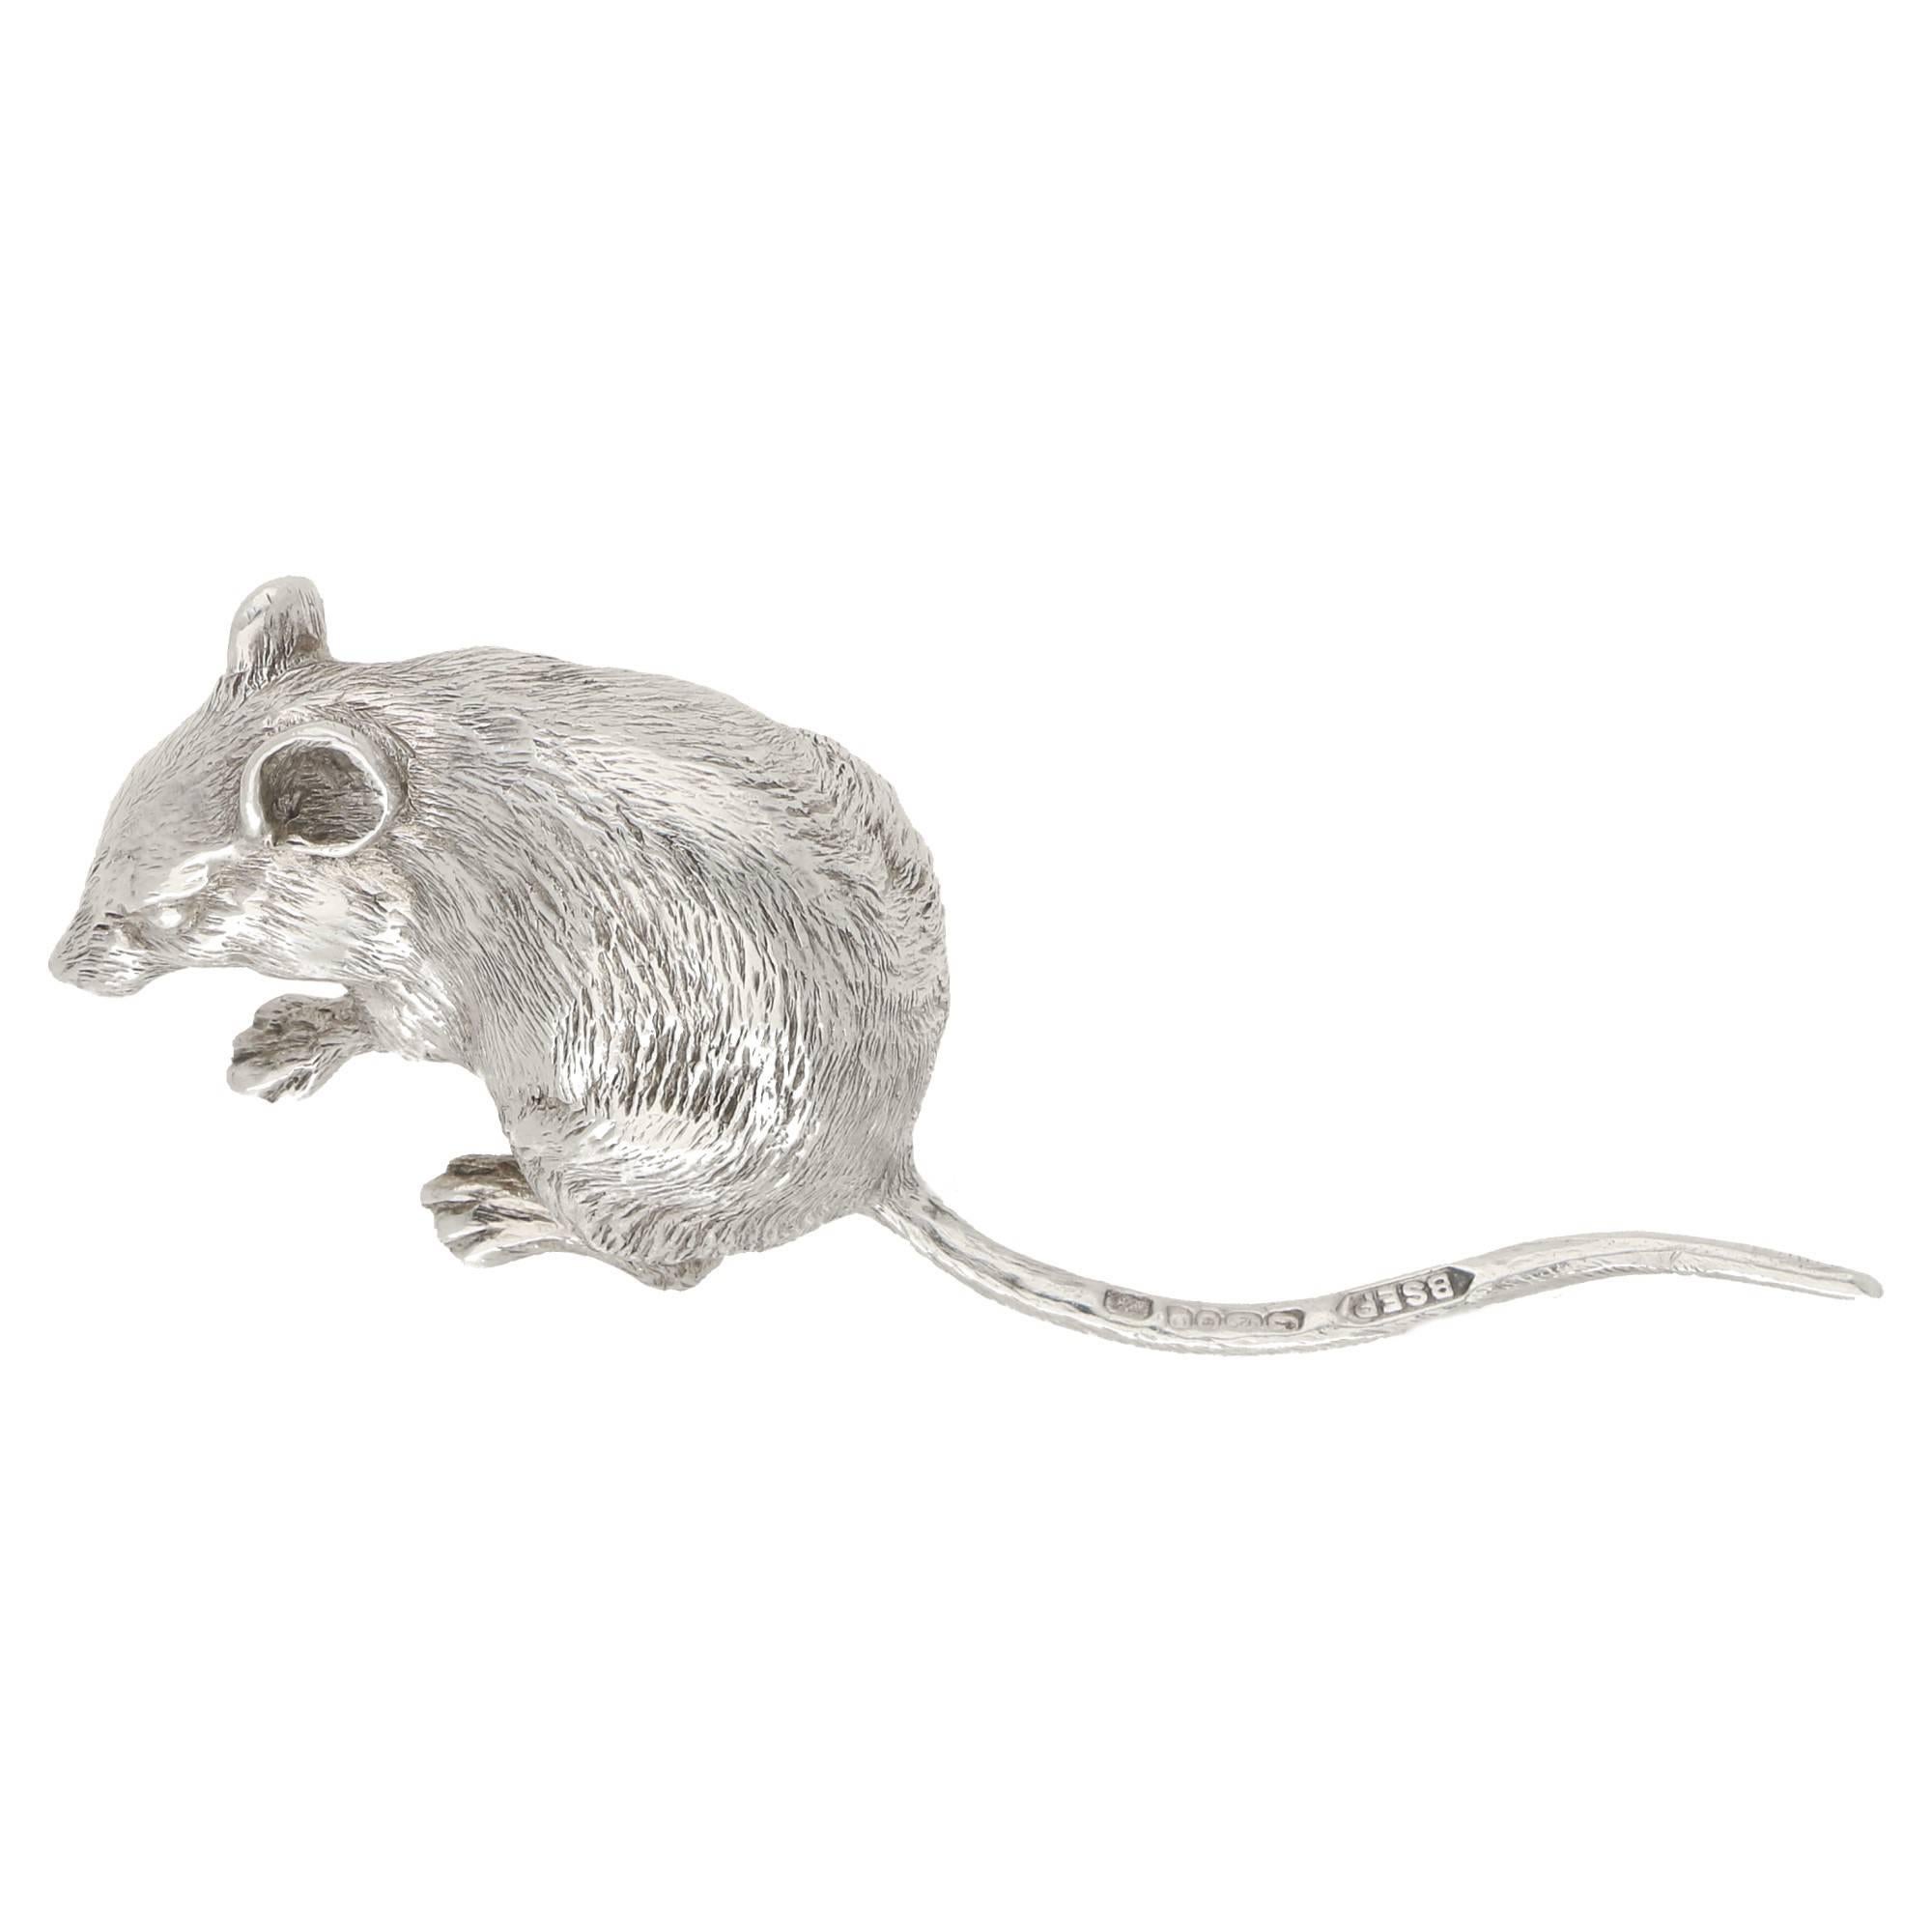 A contemporary silver mouse model, in 925 sterling silver, made by BSEP London. This beautifully detailed figure of a little mouse is made of Solid Silver and is very weighty for its miniature size. It measures 80mm length, 20mm width, 15mm height.